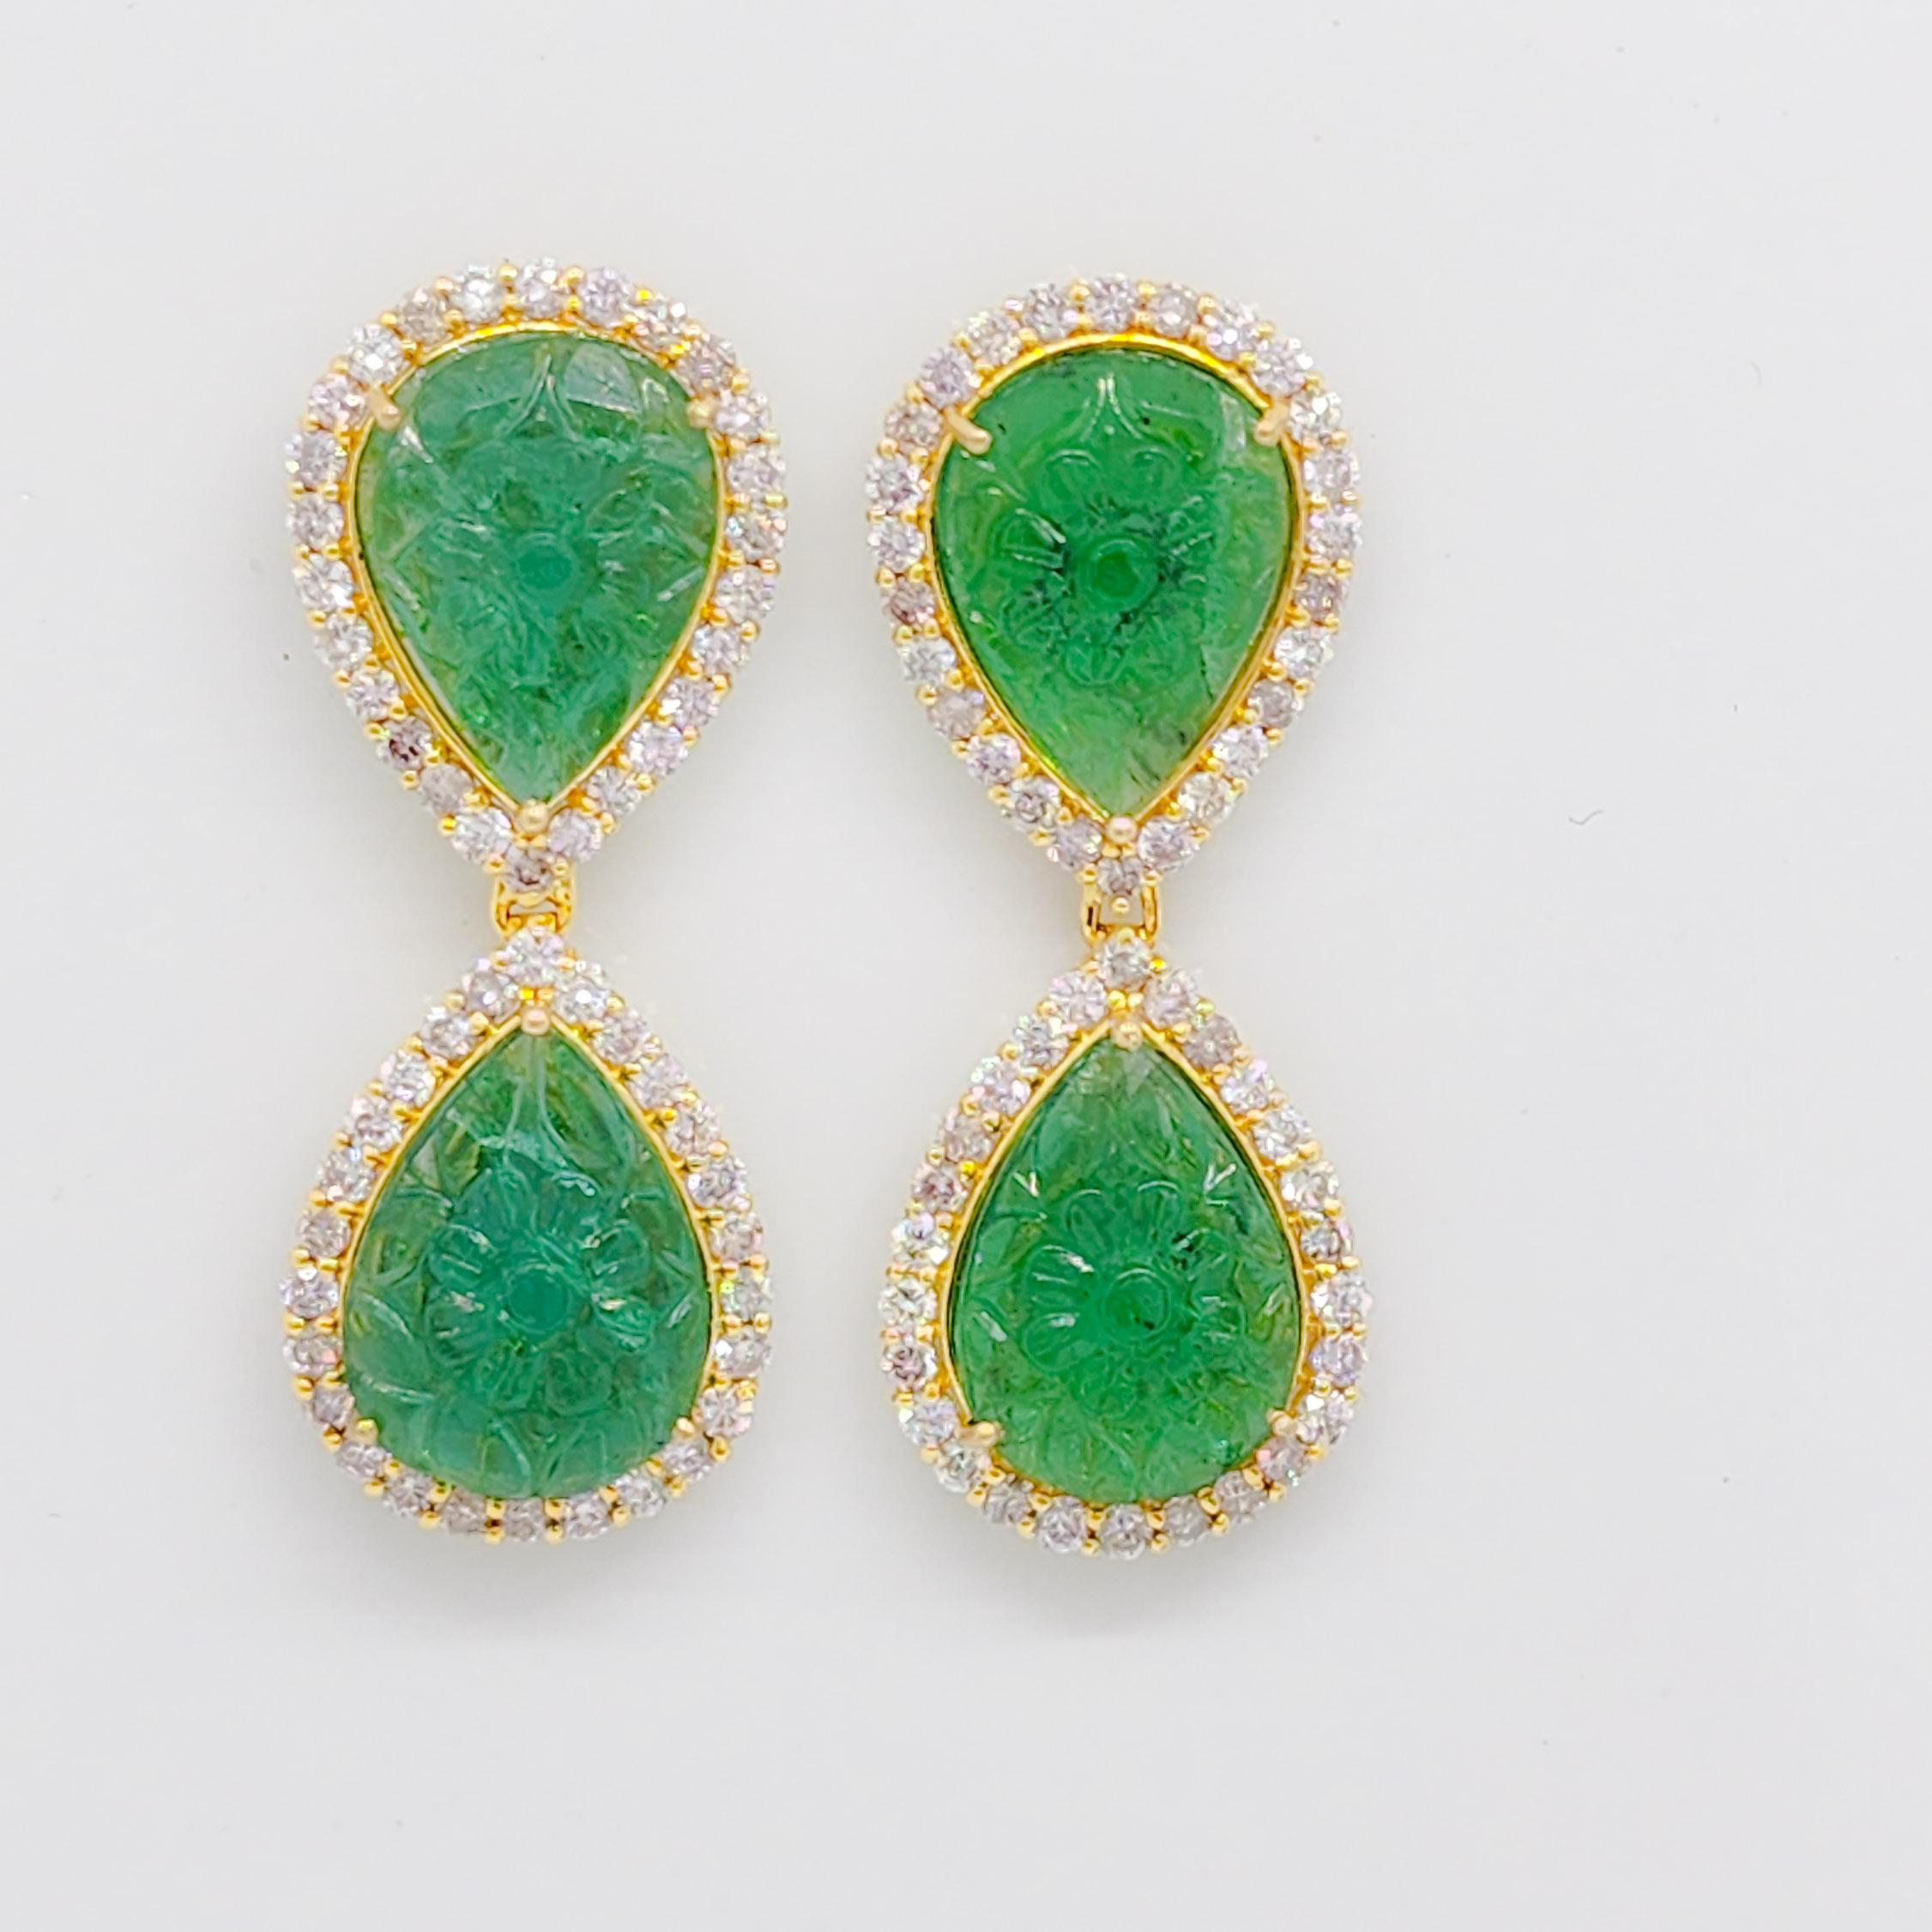 Beautiful 16.64 ct. carved emerald pear shapes with 2.74 ct. good quality white diamond rounds.  Handmade in 18k yellow gold.  